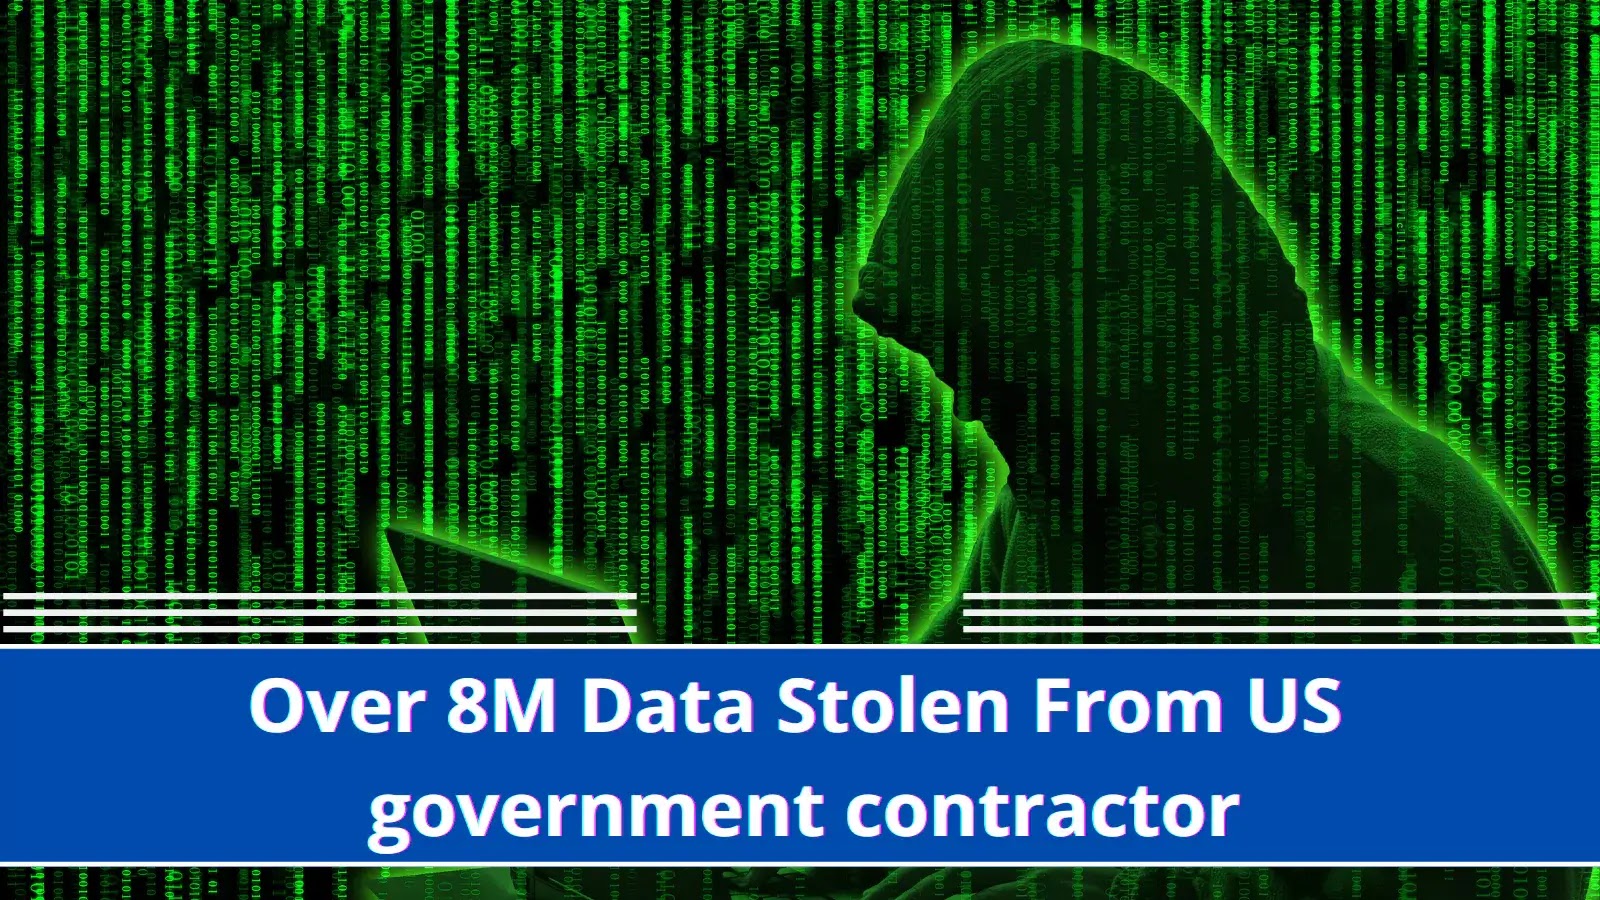 Hackers Stole Over 8 Million Users Data From U.S. Government Services Contractor